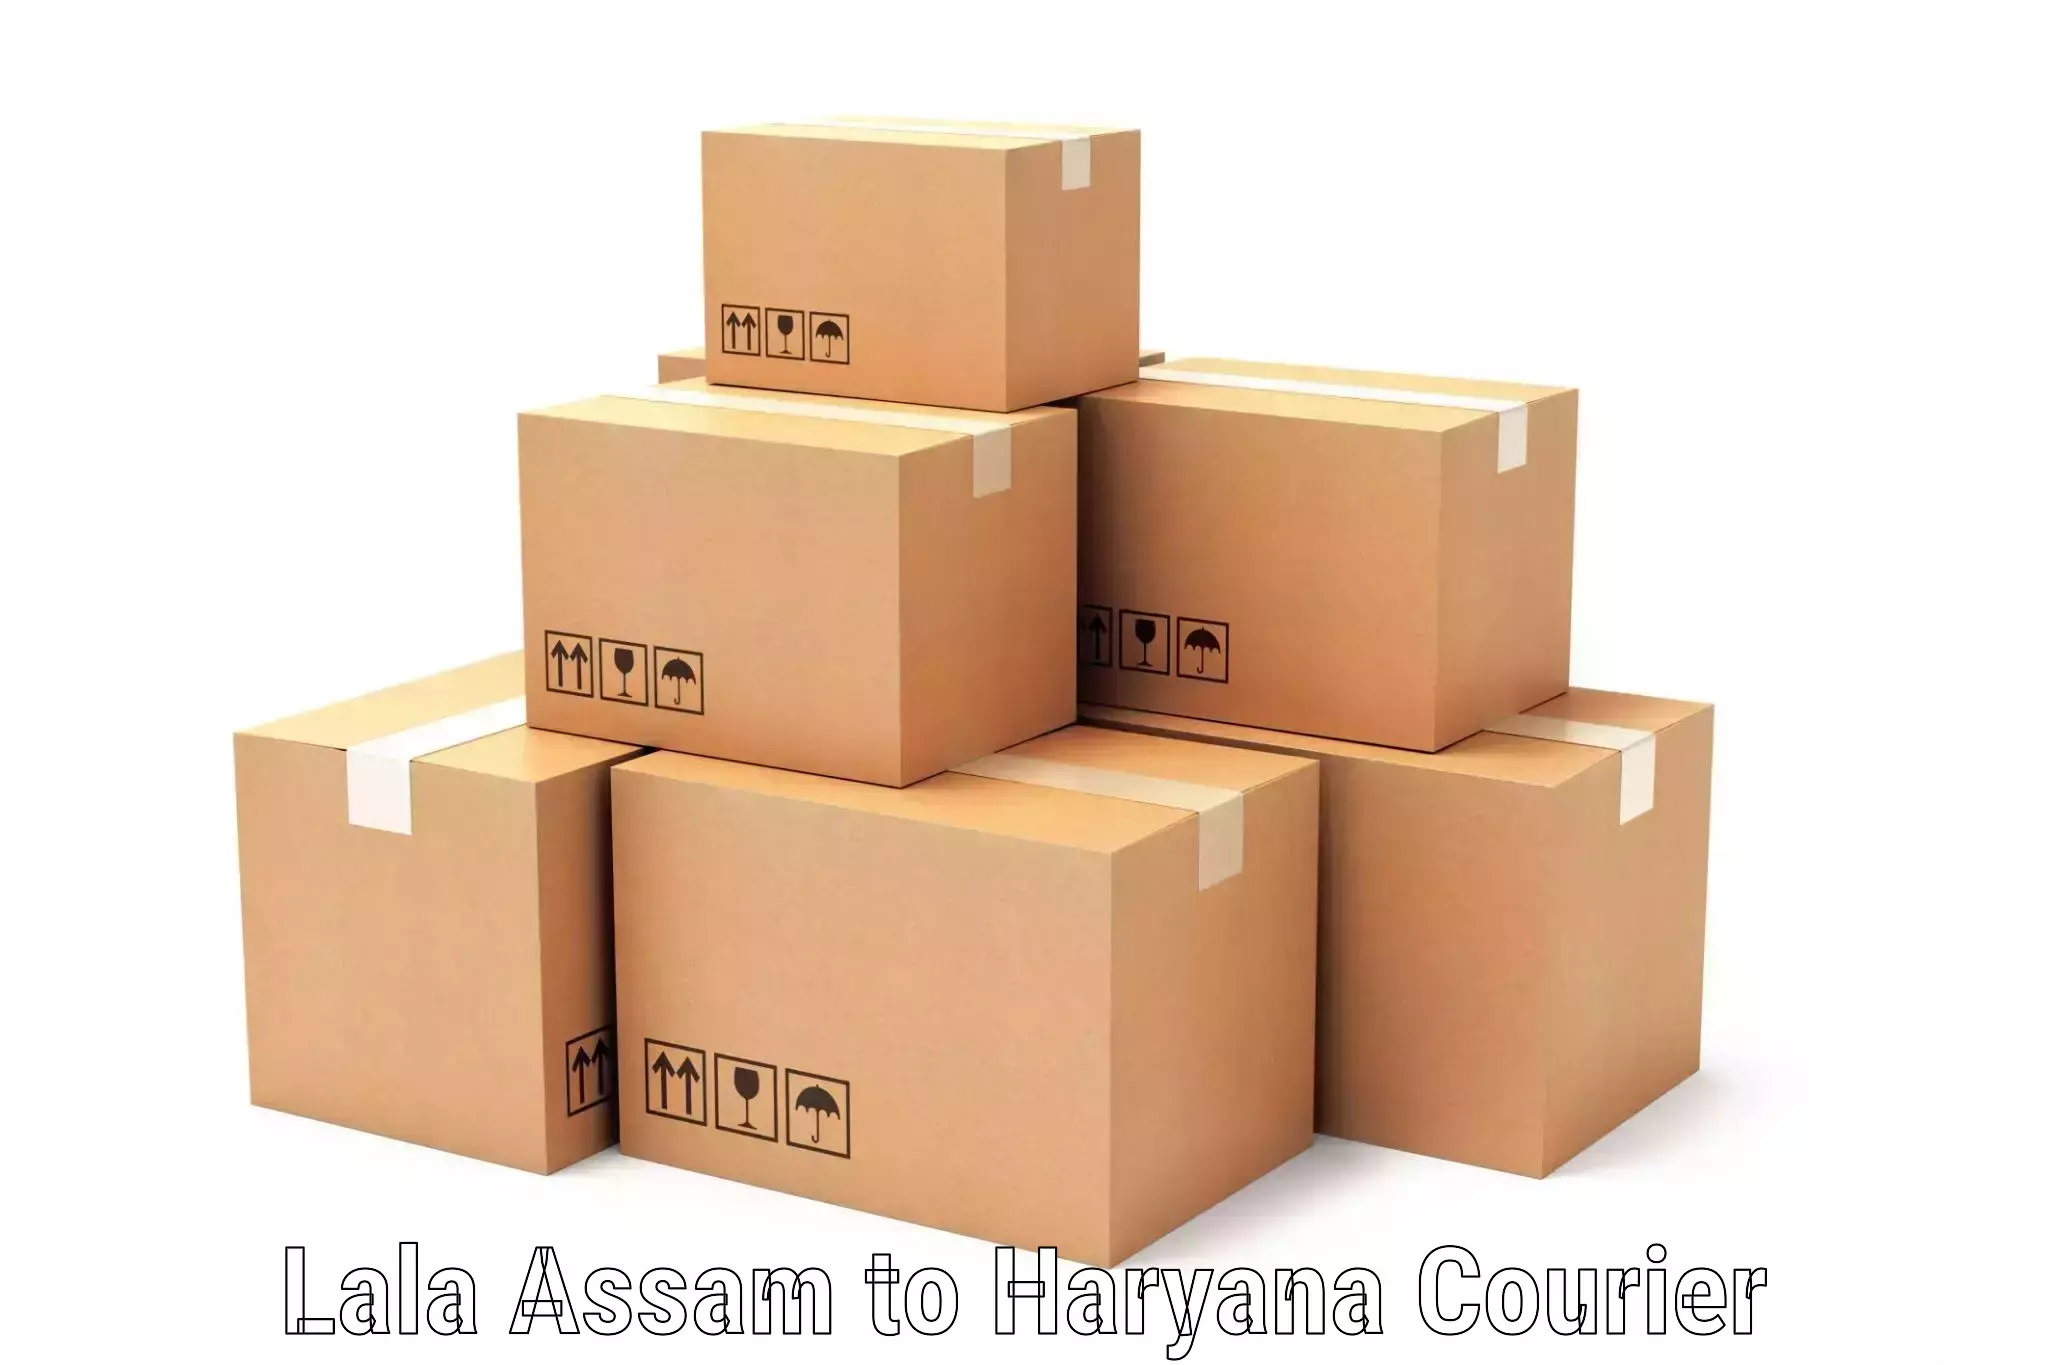 Residential courier service Lala Assam to Rewari